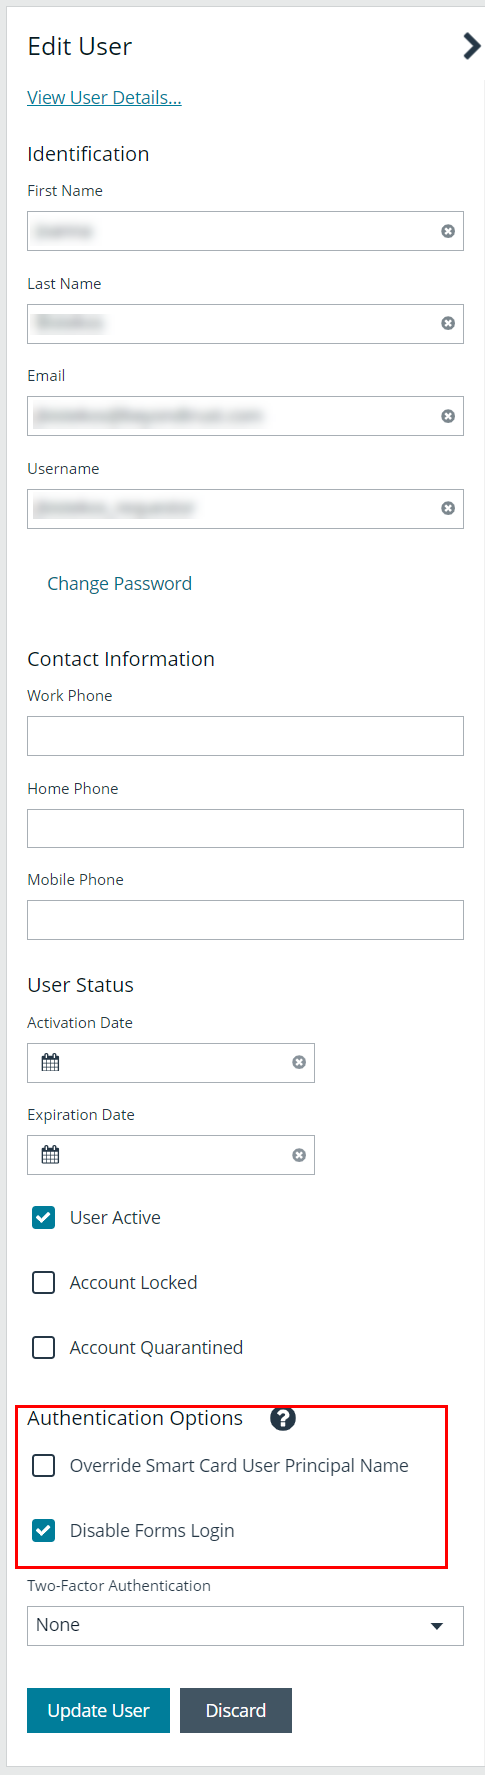 Disable Forms Login option on a User account.